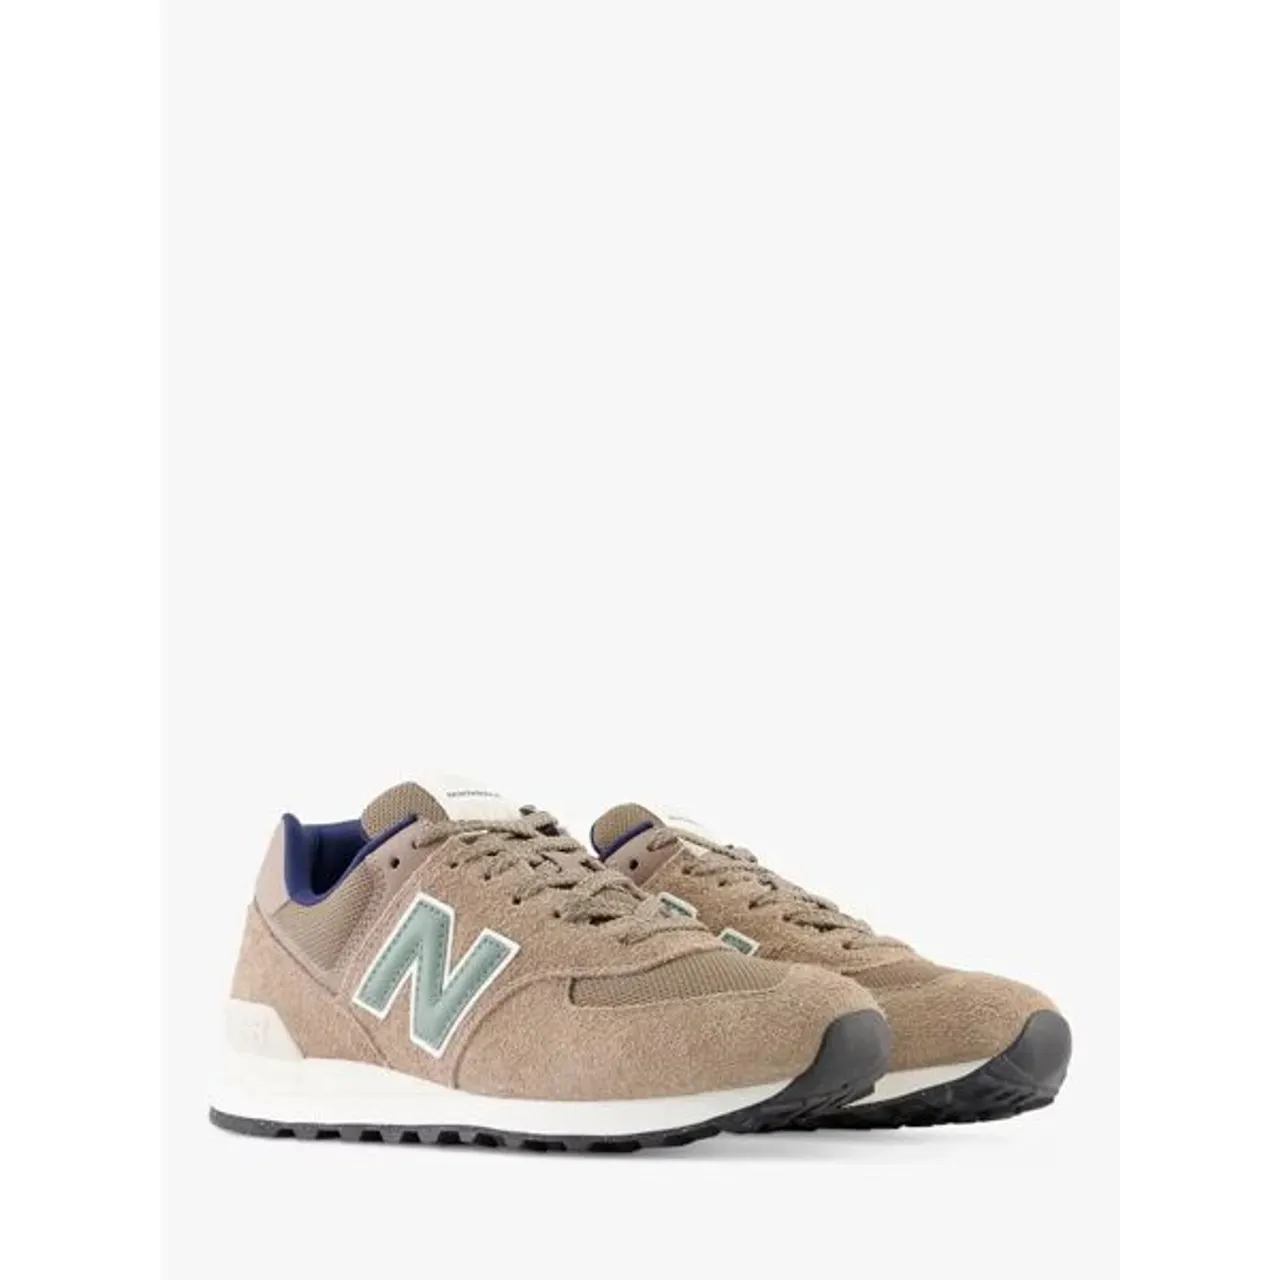 New Balance 574 Suede Trainers - Brown (225) - Male